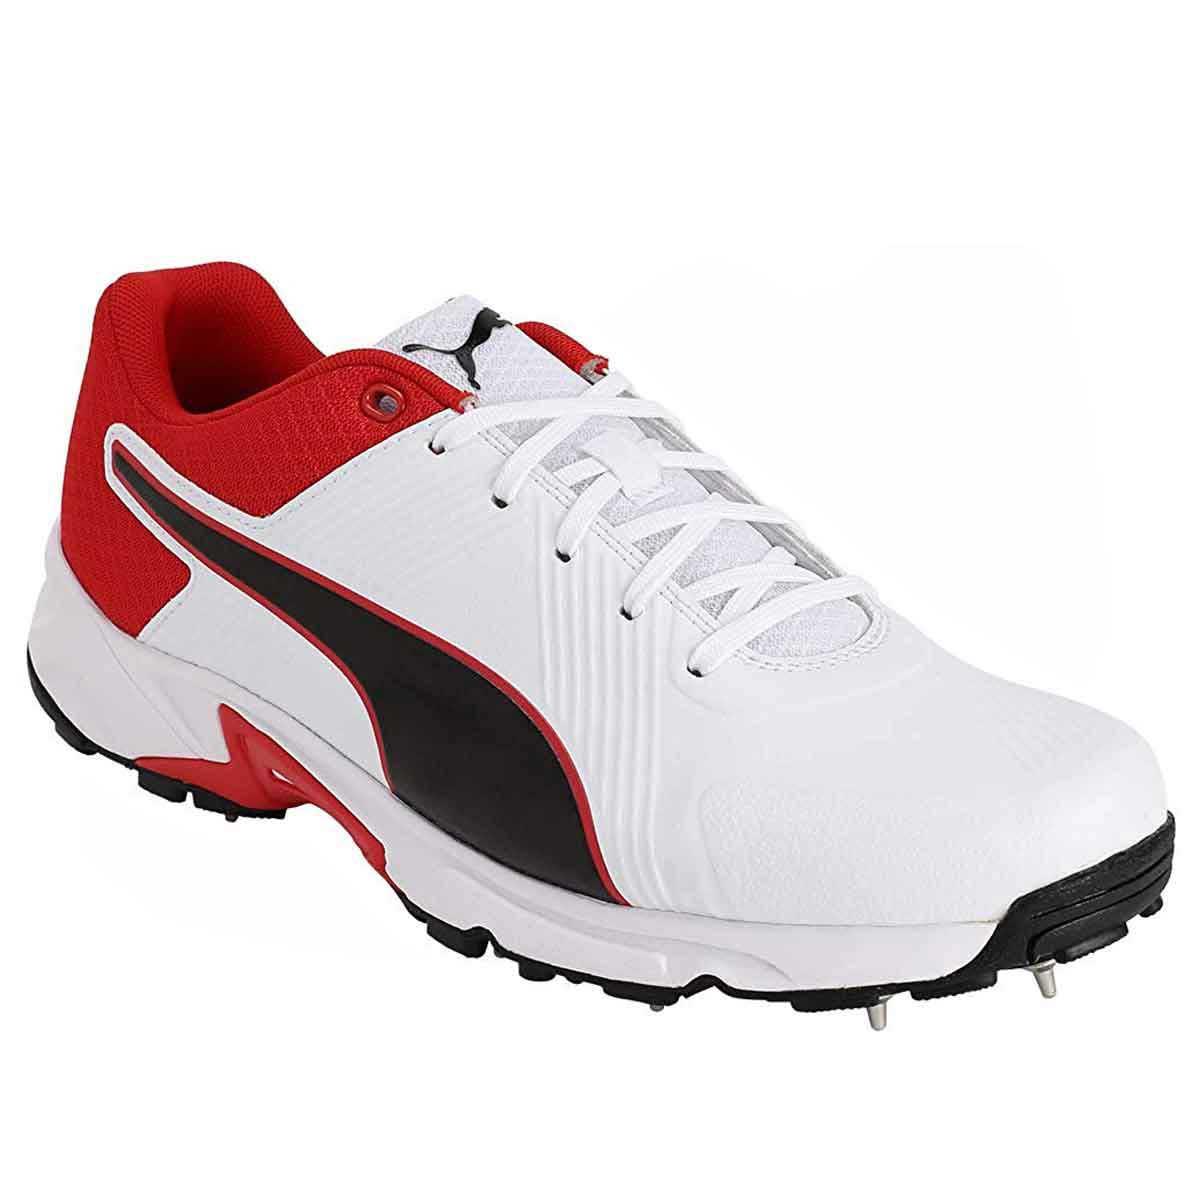 Buy Puma Spike 19.2 Cricket Shoes (White/Black/Red) Online India